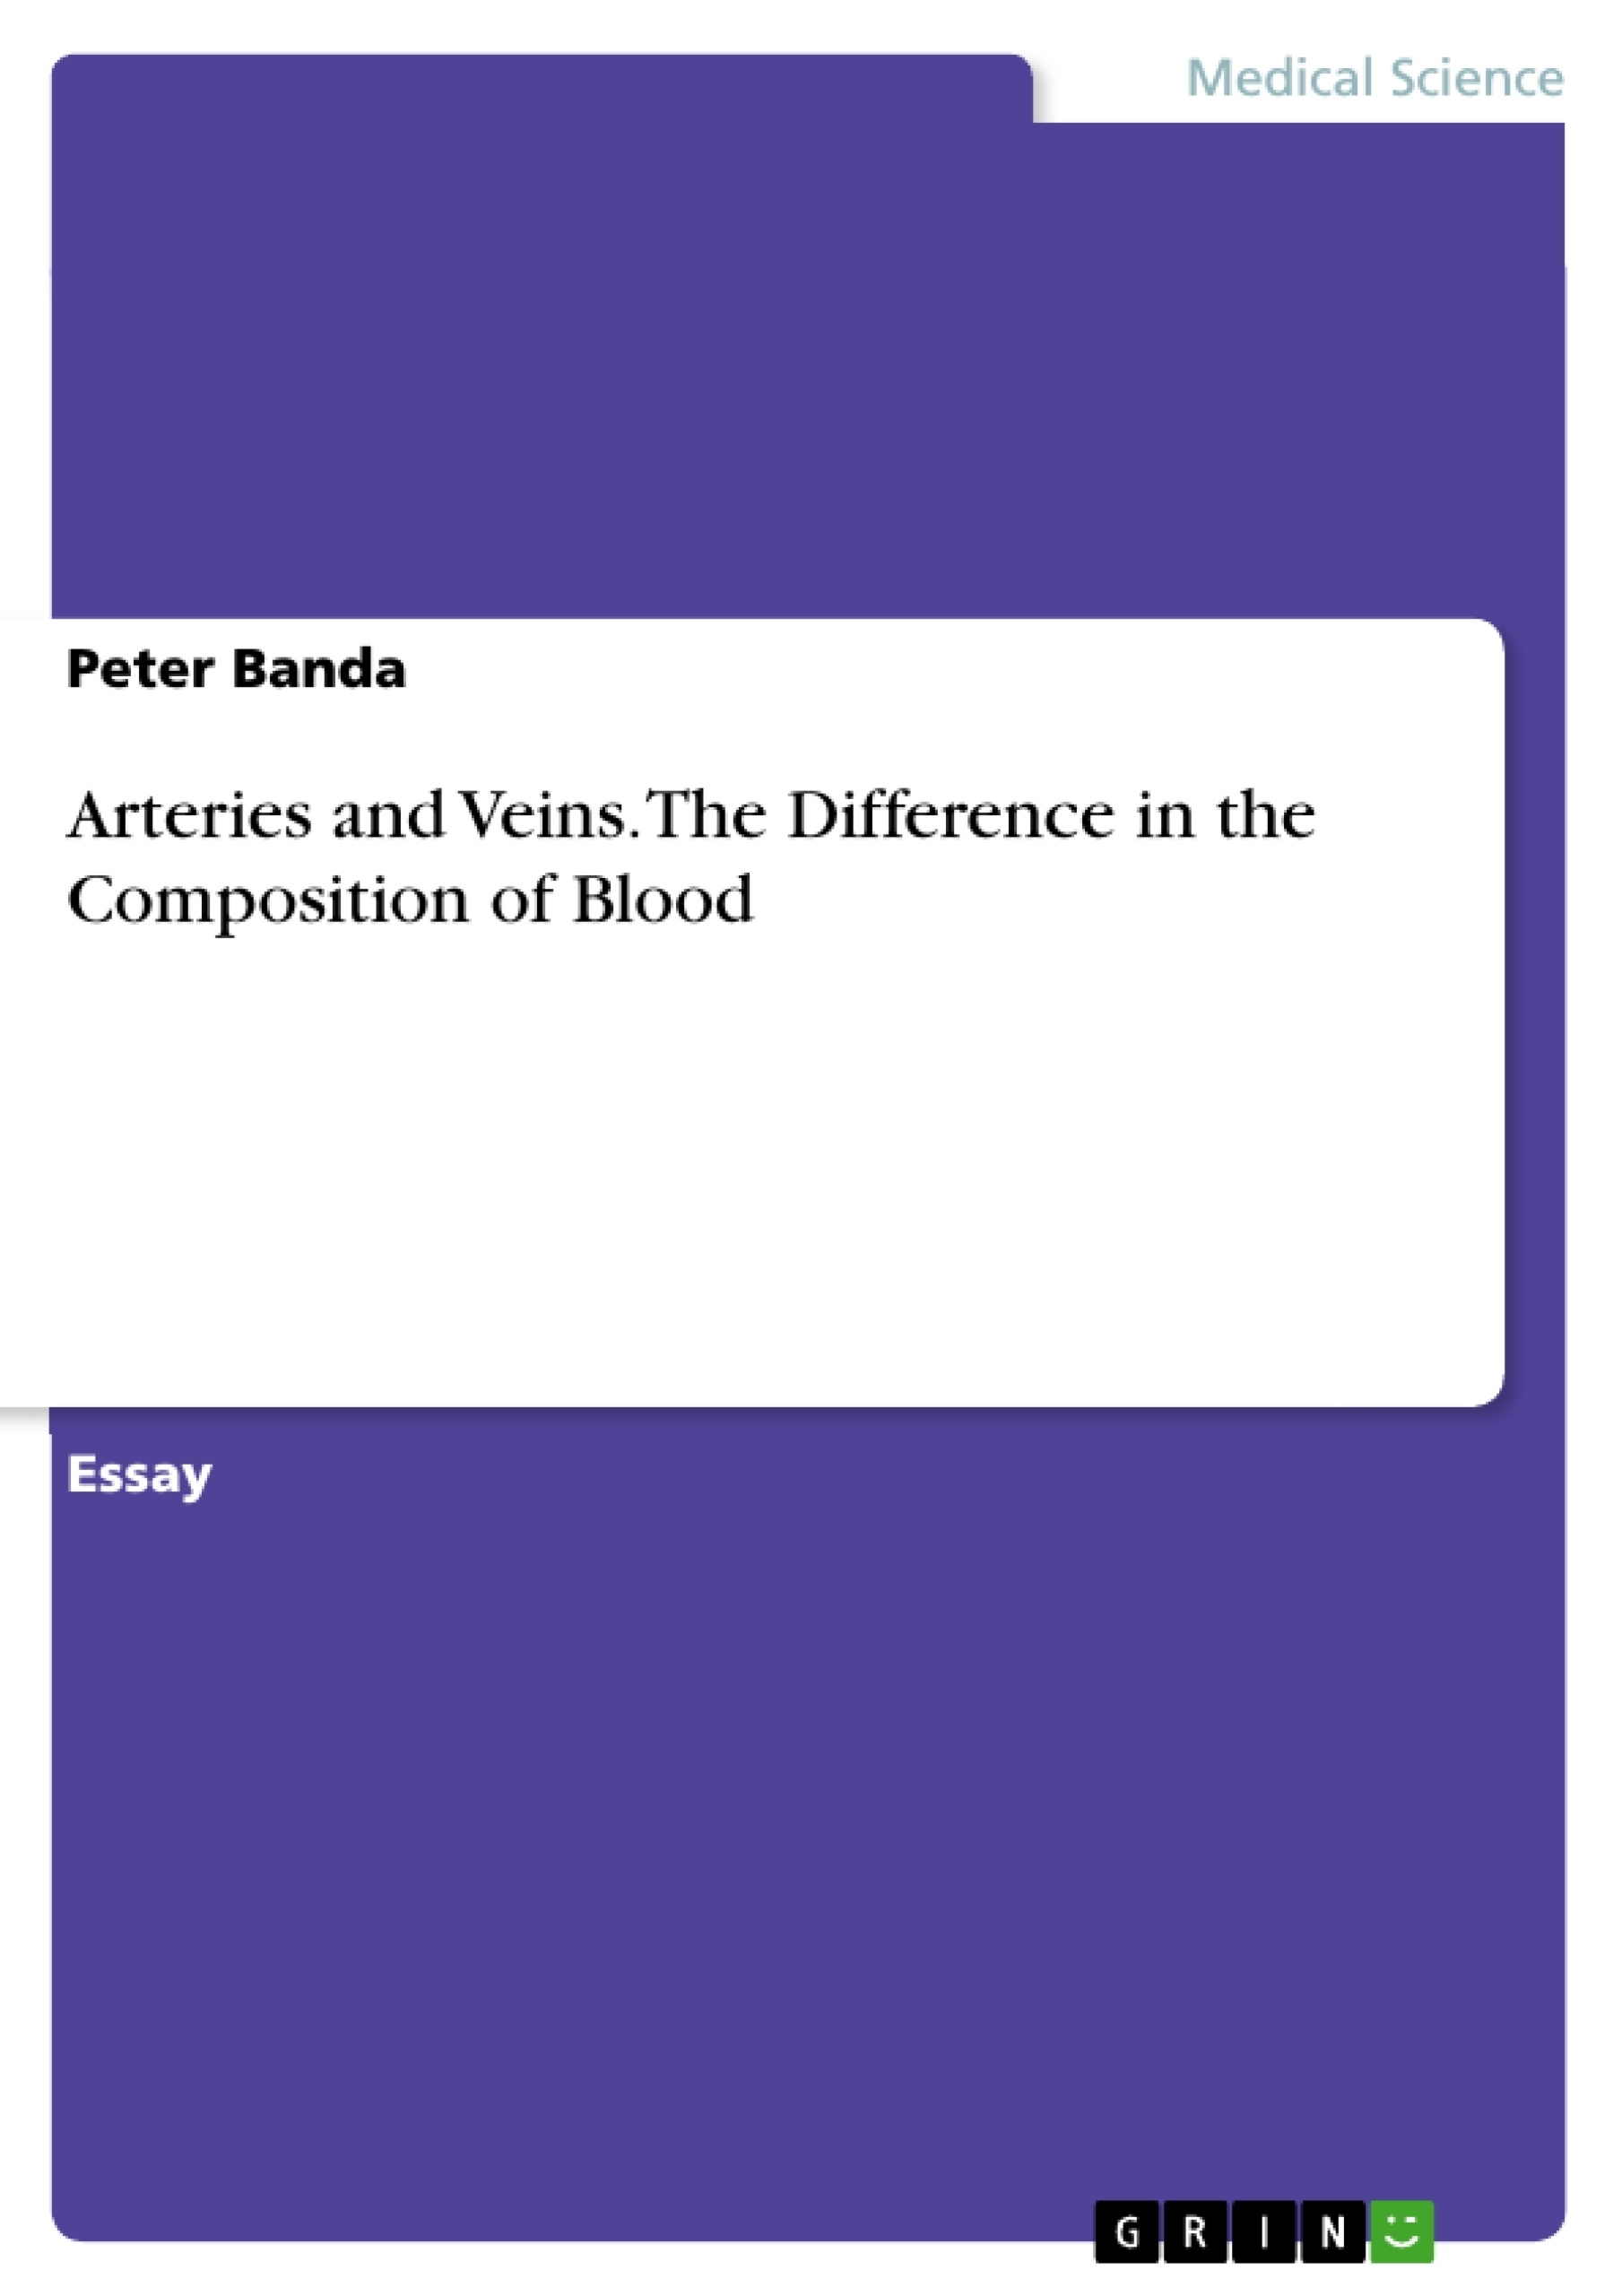 Titre: Arteries and Veins. The Difference in the Composition of Blood